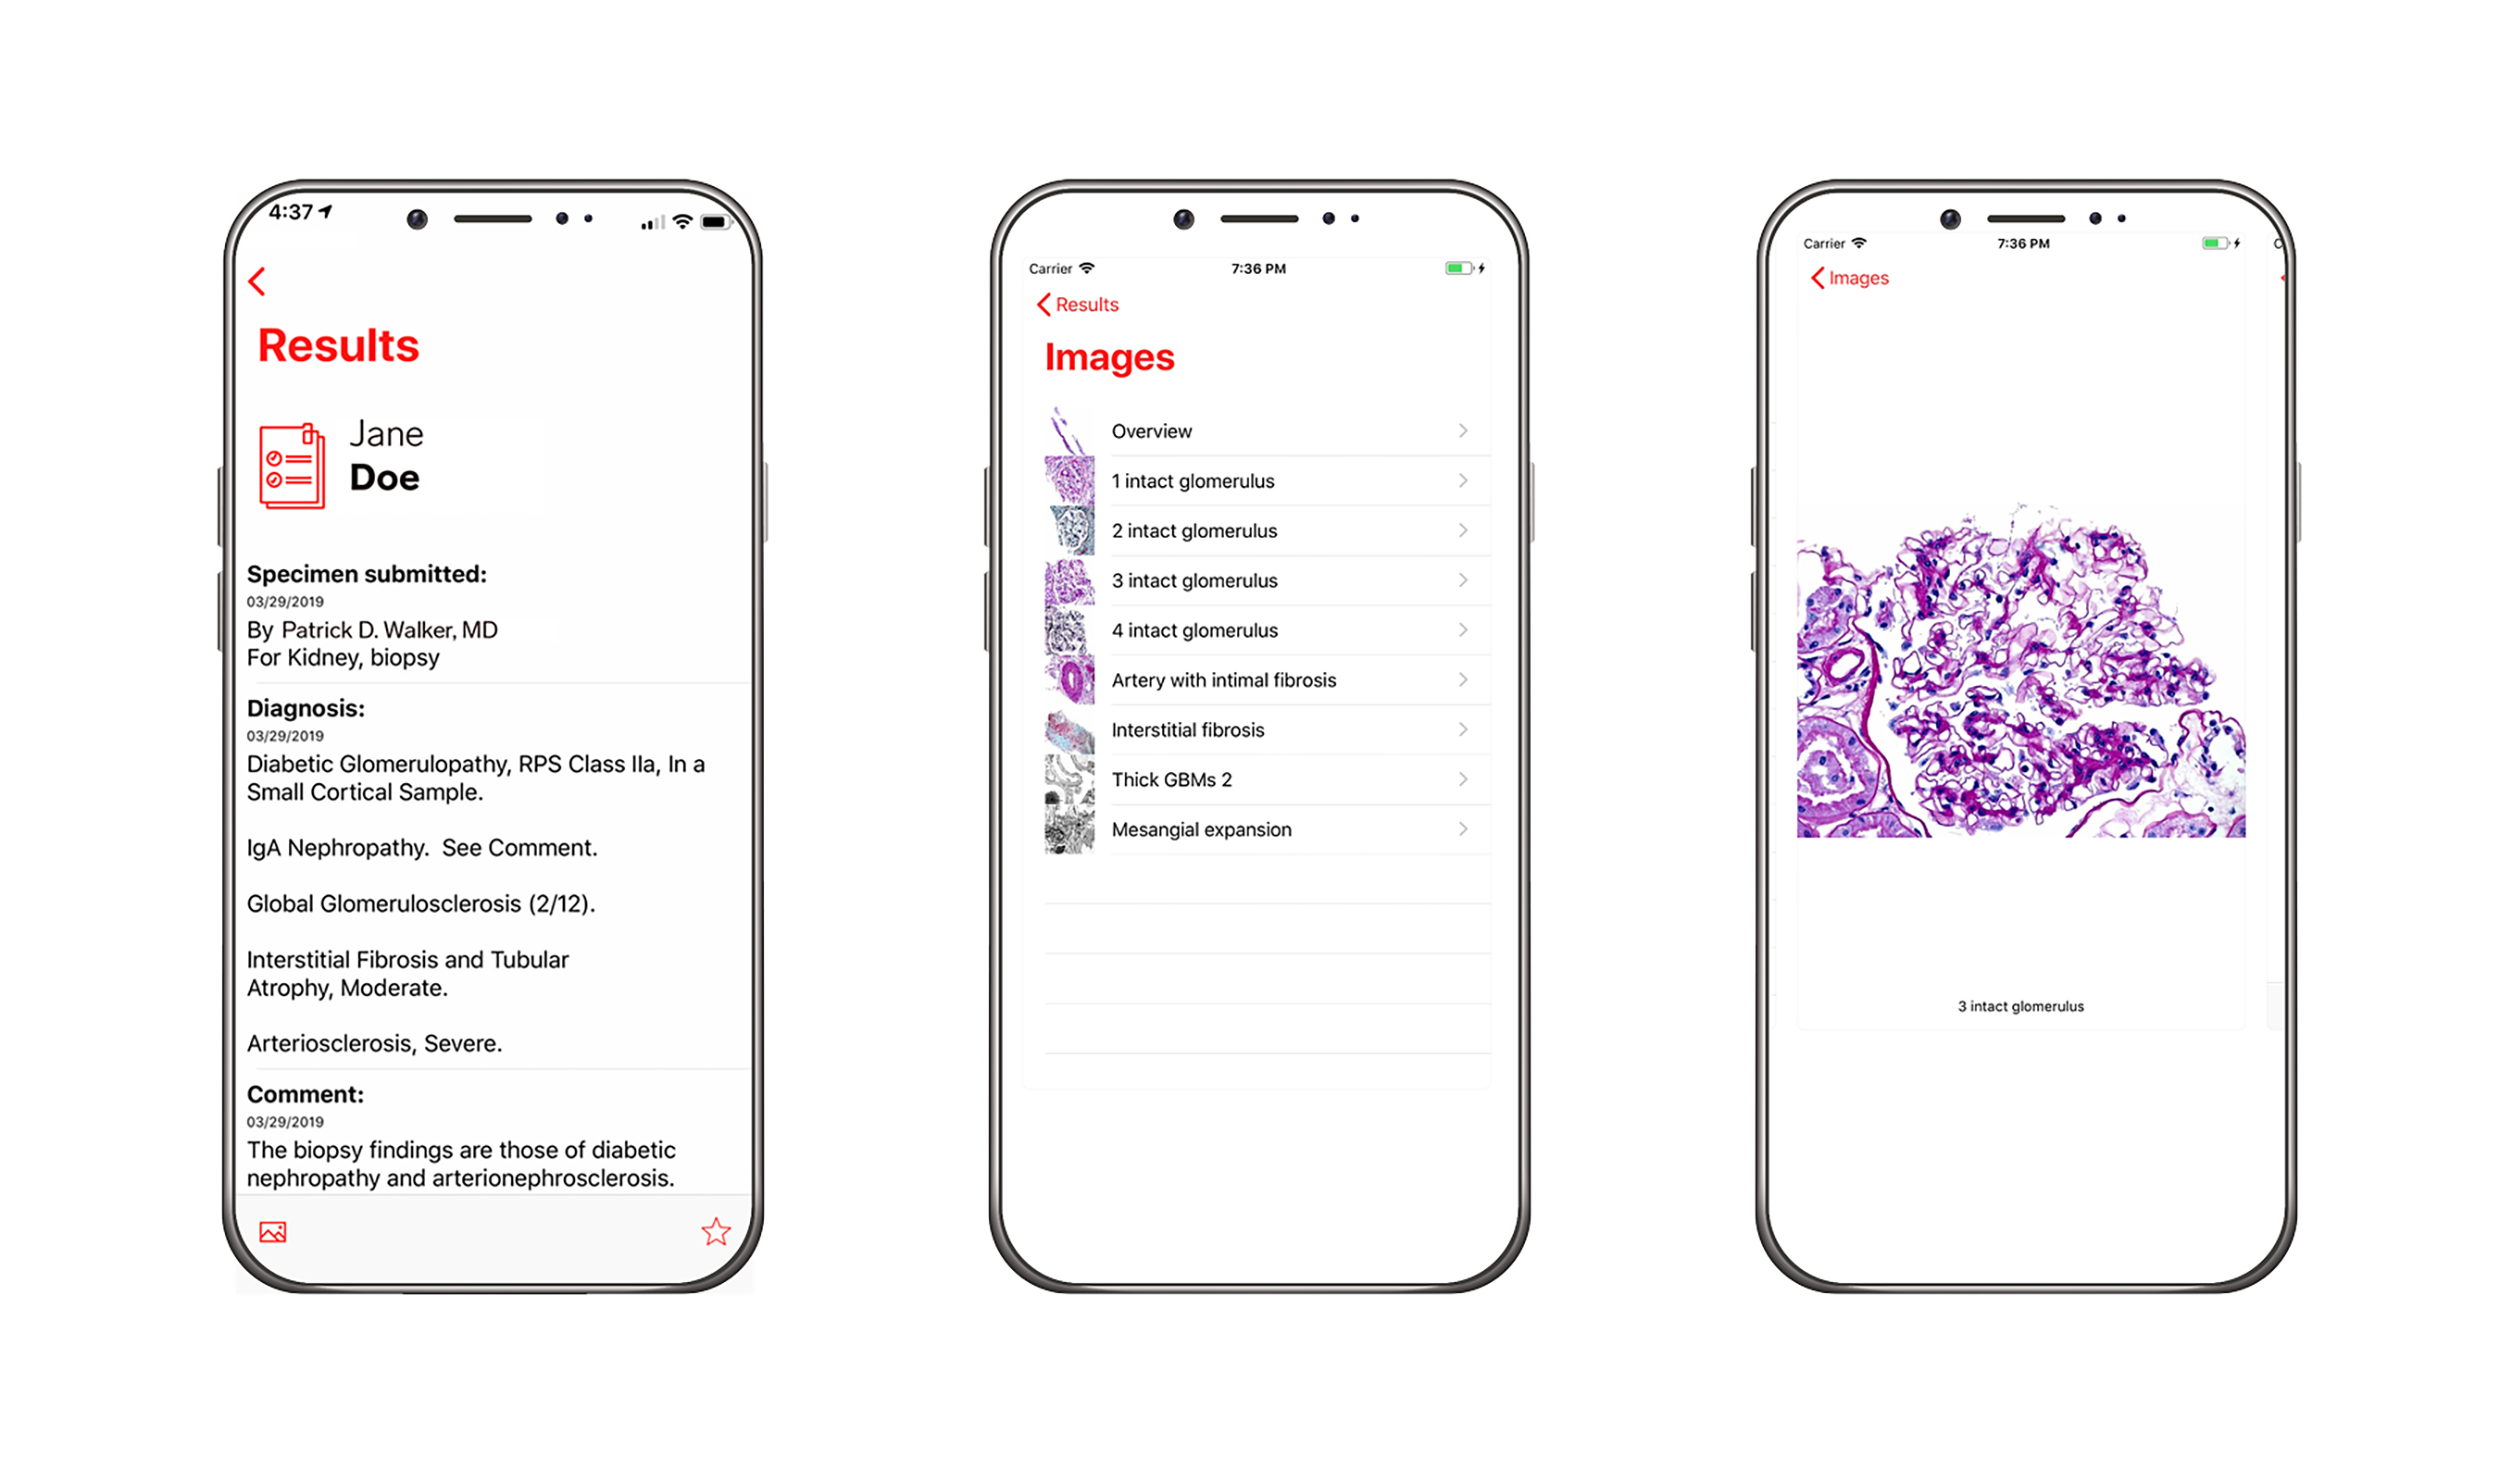 arkana labs connect app example showing results of biopsy and biopsy images taken by renal pathologists at arkana laboratories